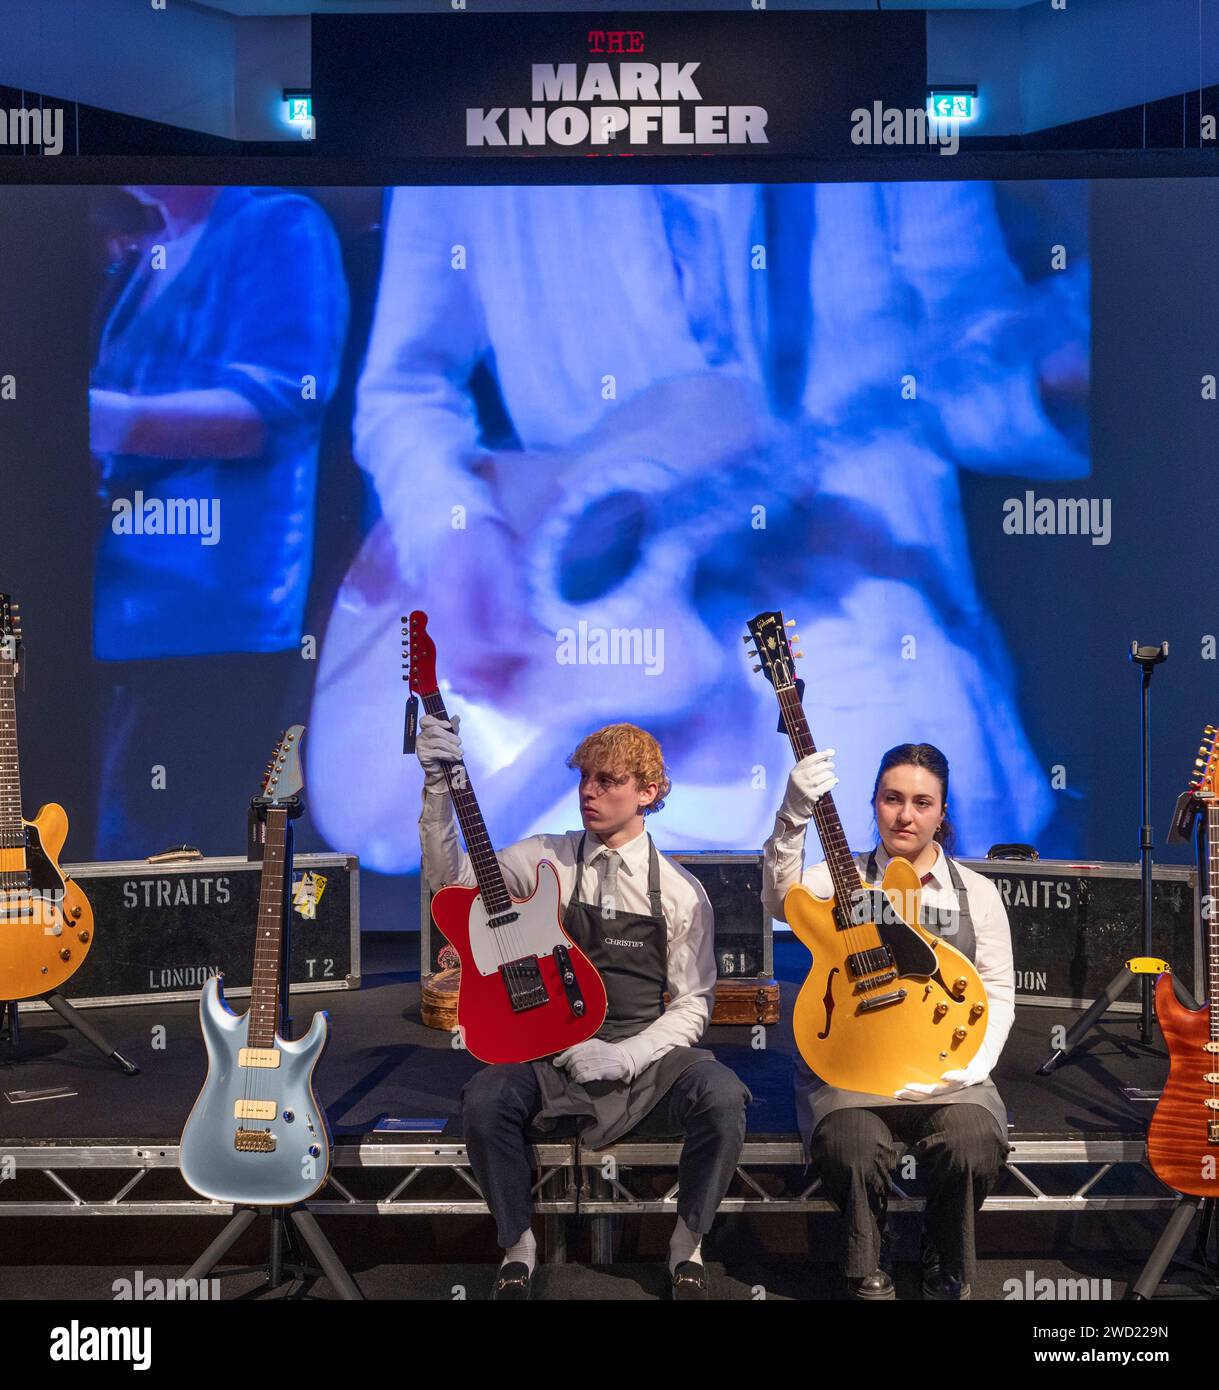 Ex-Dire Straits singer Mark Knopfler to sell guitar collection for charity, Mark Knopfler